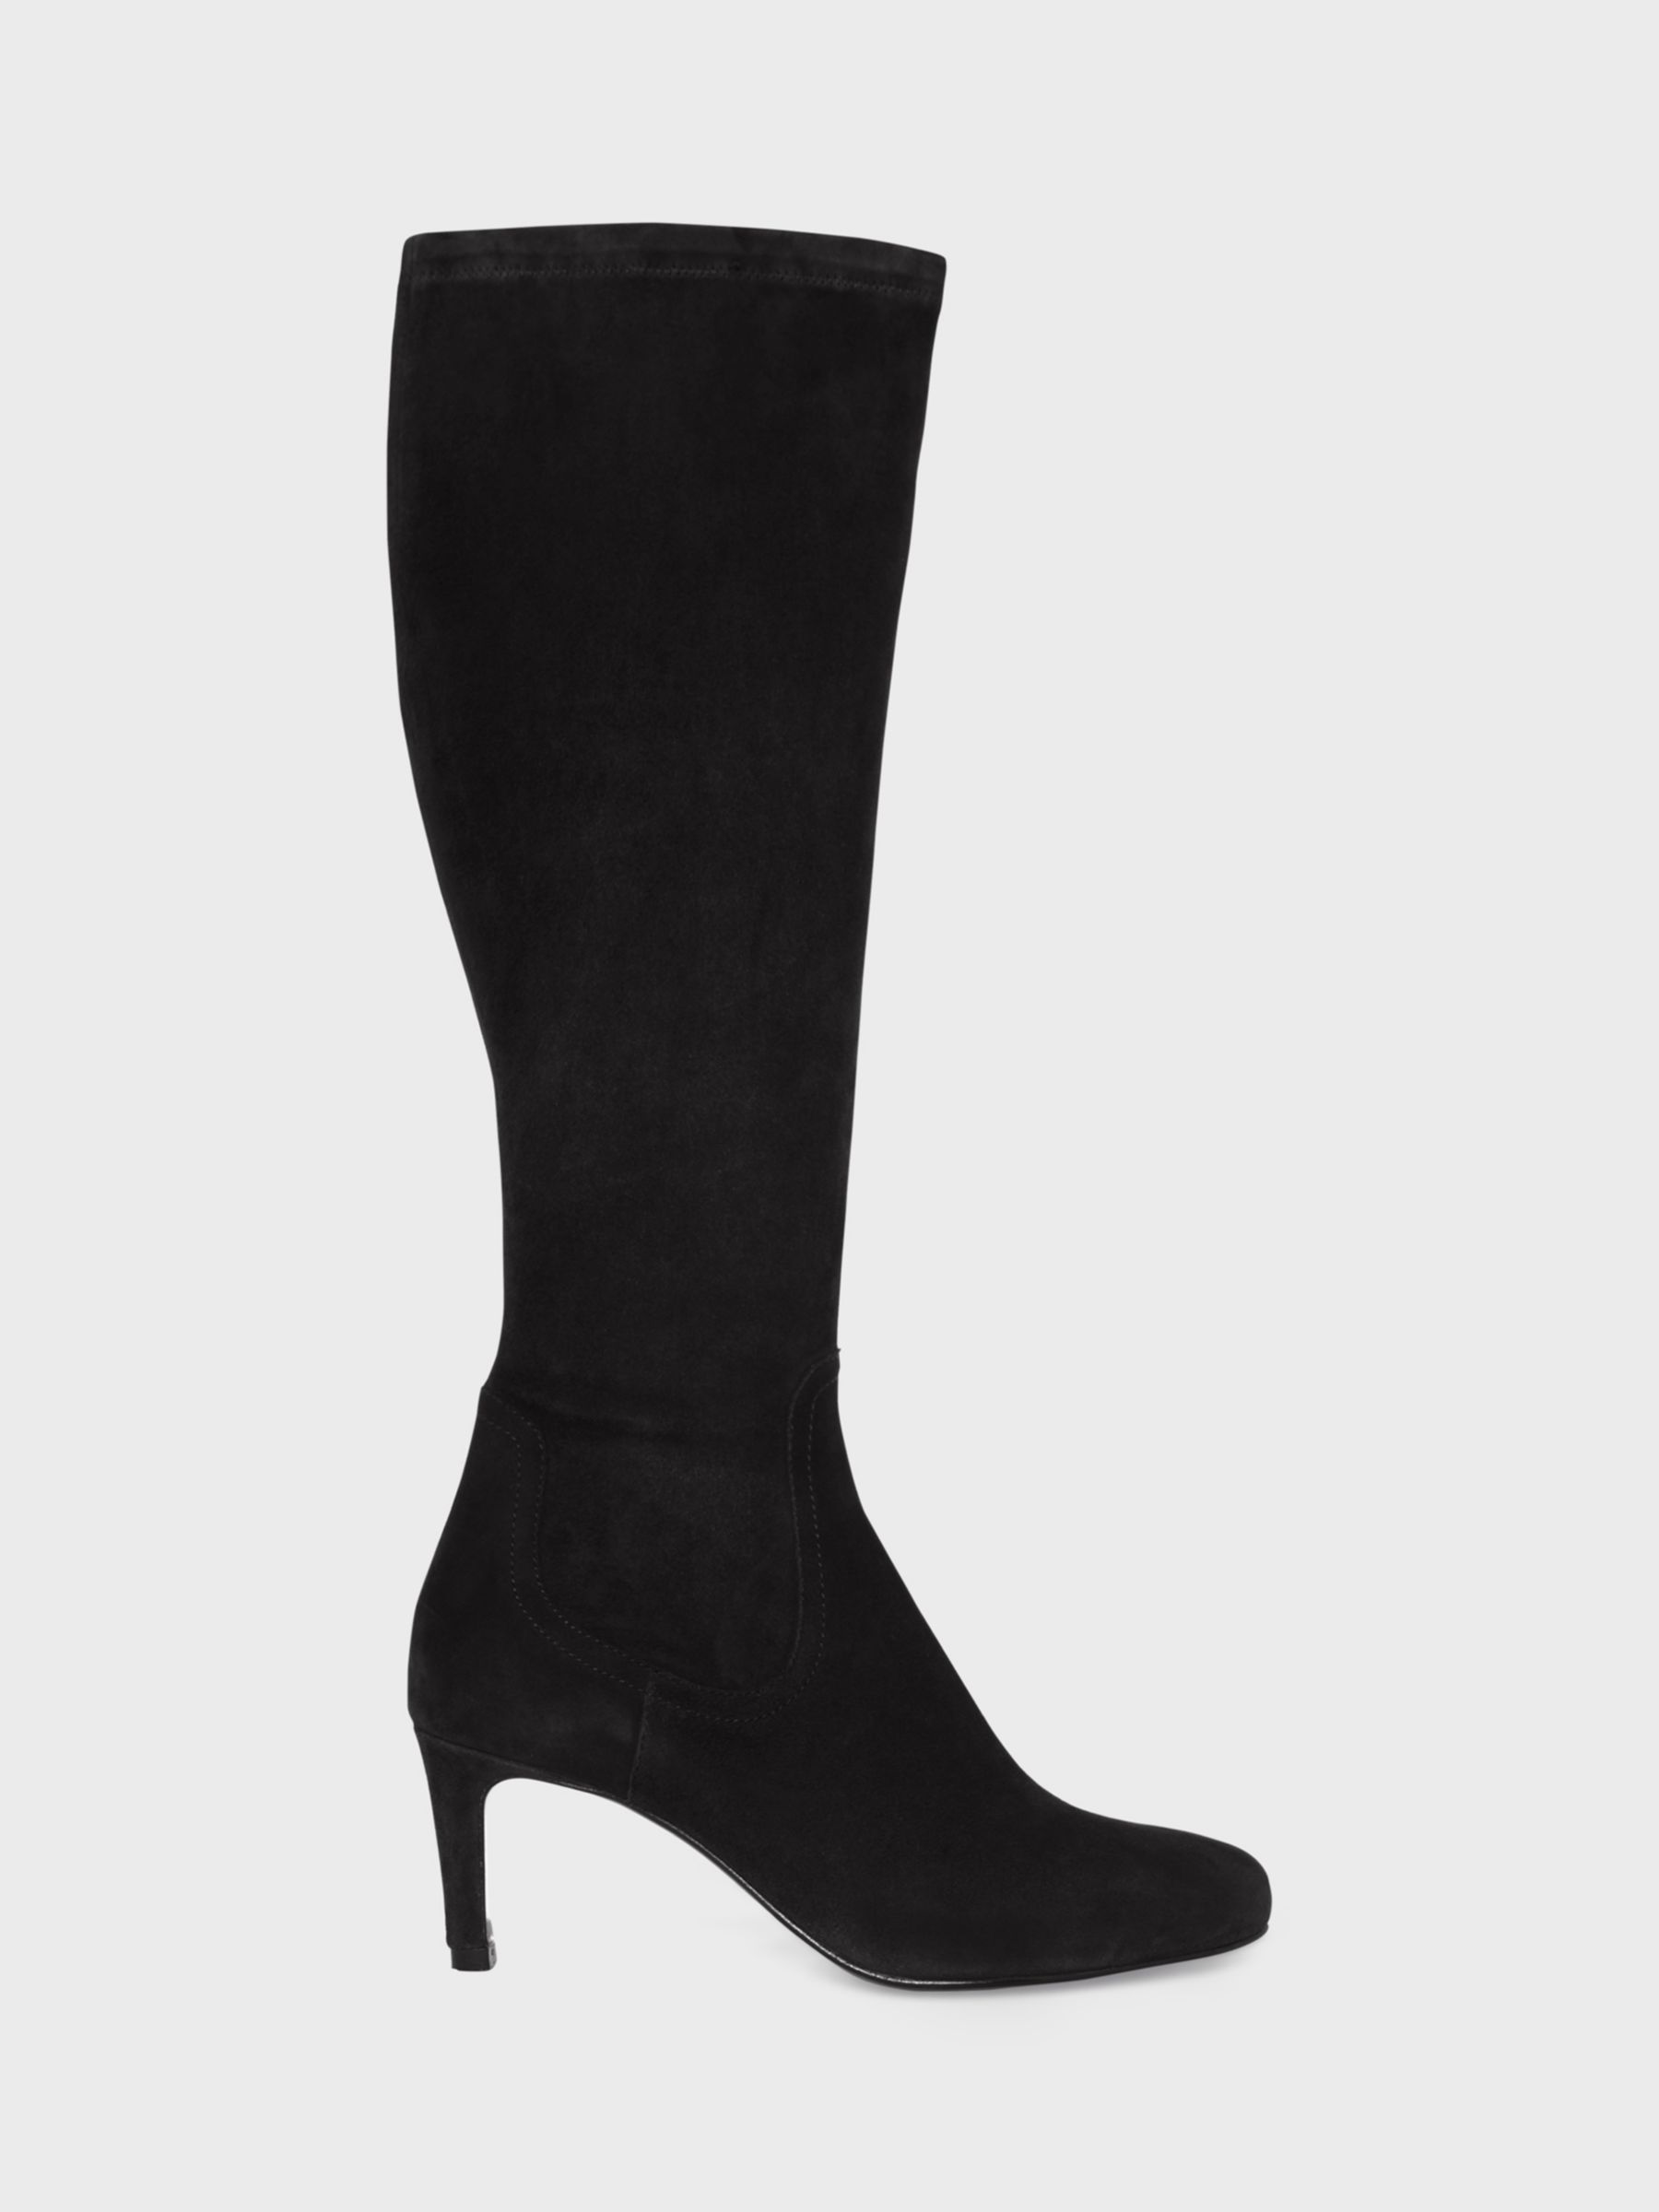 Hobbs Lizzie Leather Stretch Boots, Black, 3